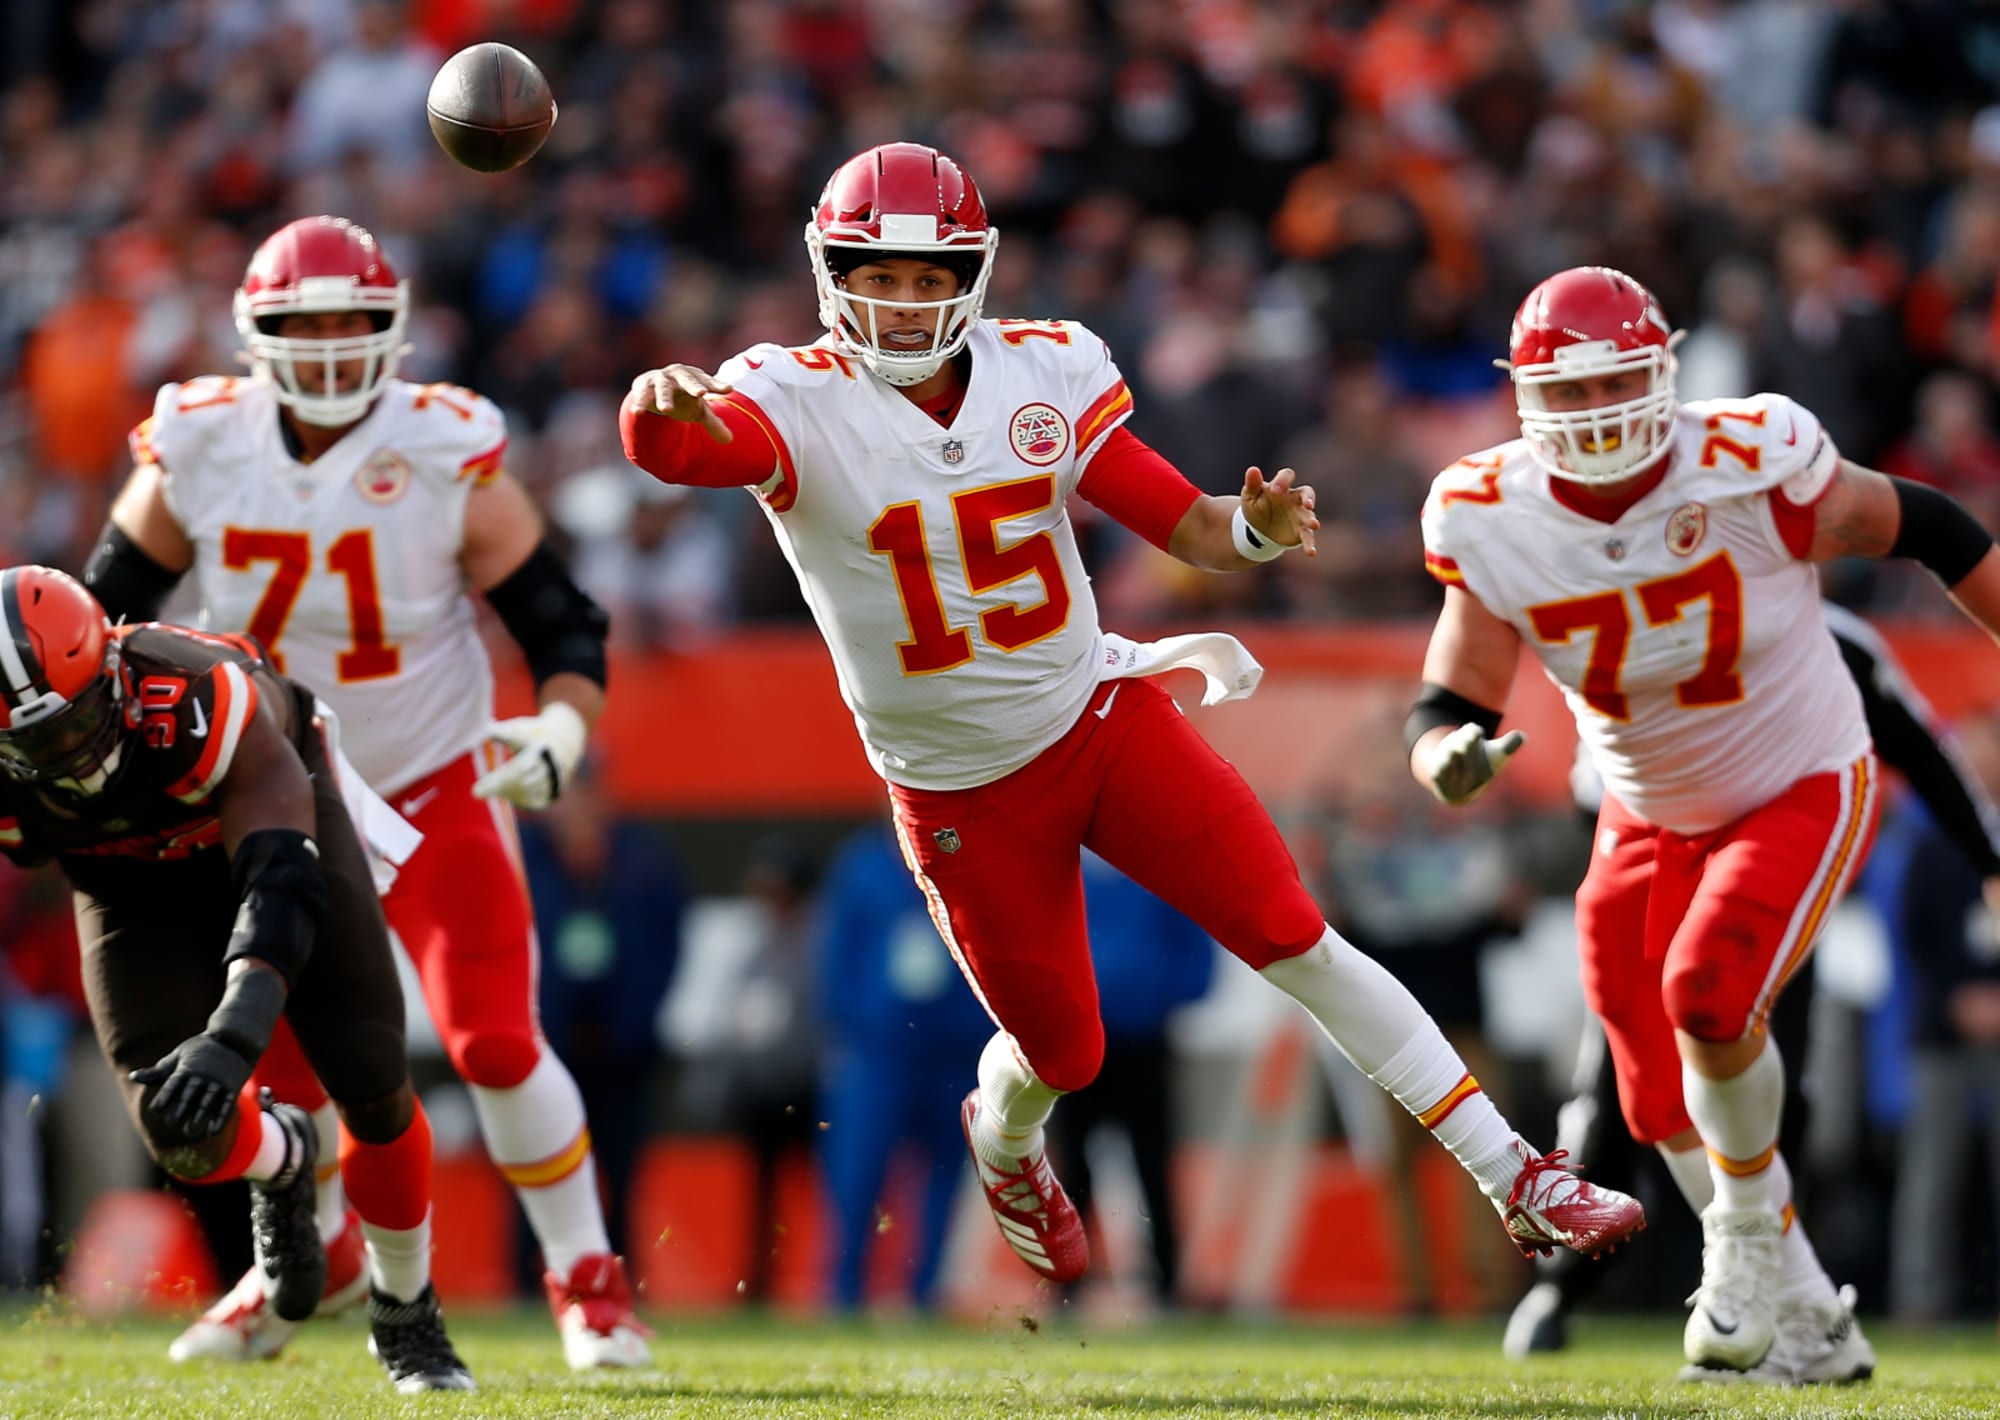 NFL standings, Week 9: Kansas City Chiefs tie L.A. Rams for NFL's best record